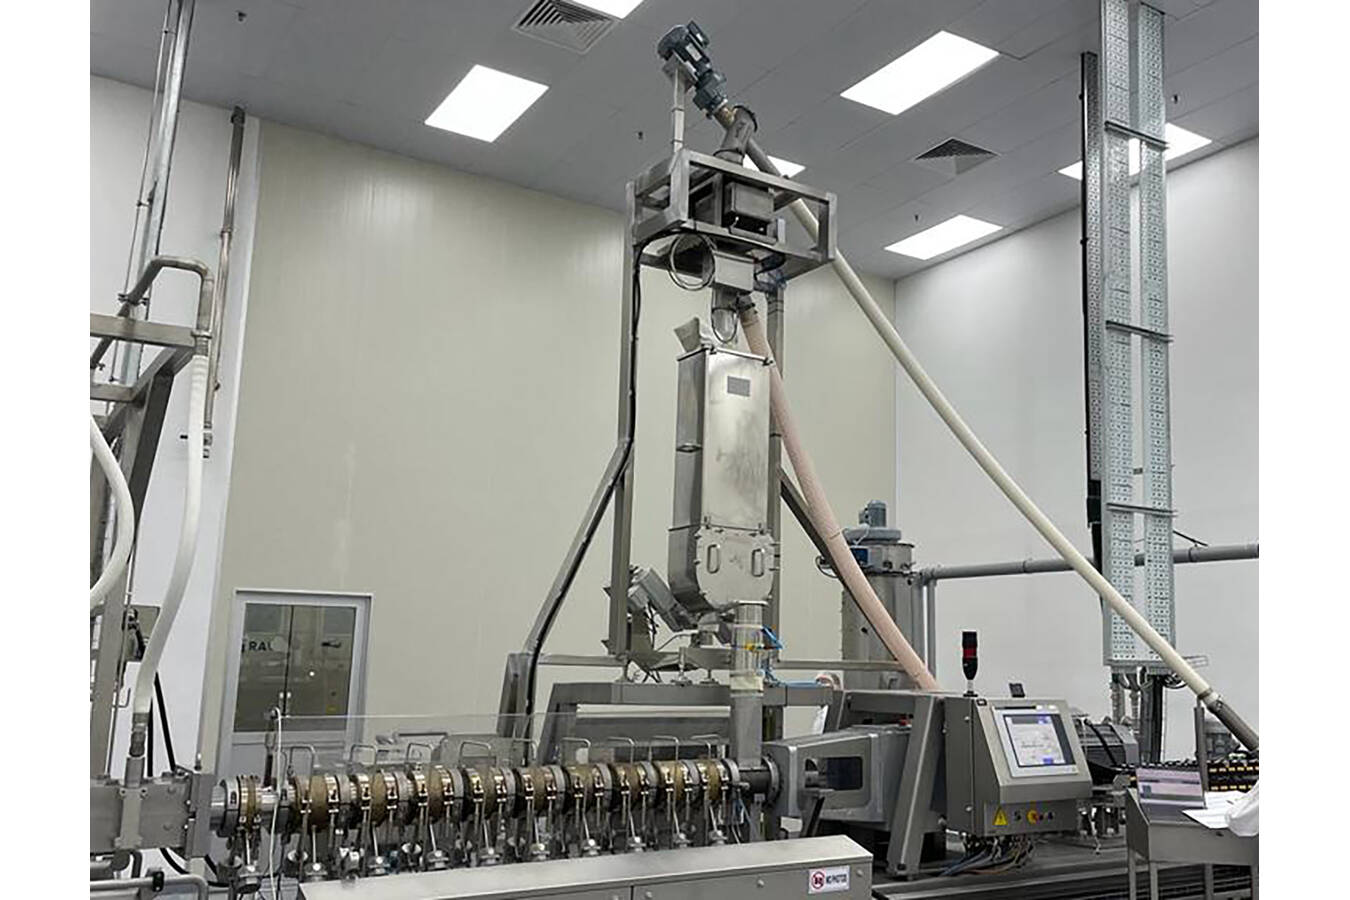 Built into the CREMER production line, the GLS metal detector from Sesotec helps to efficiently meet standards and requirements for safe and sustainable food processing.